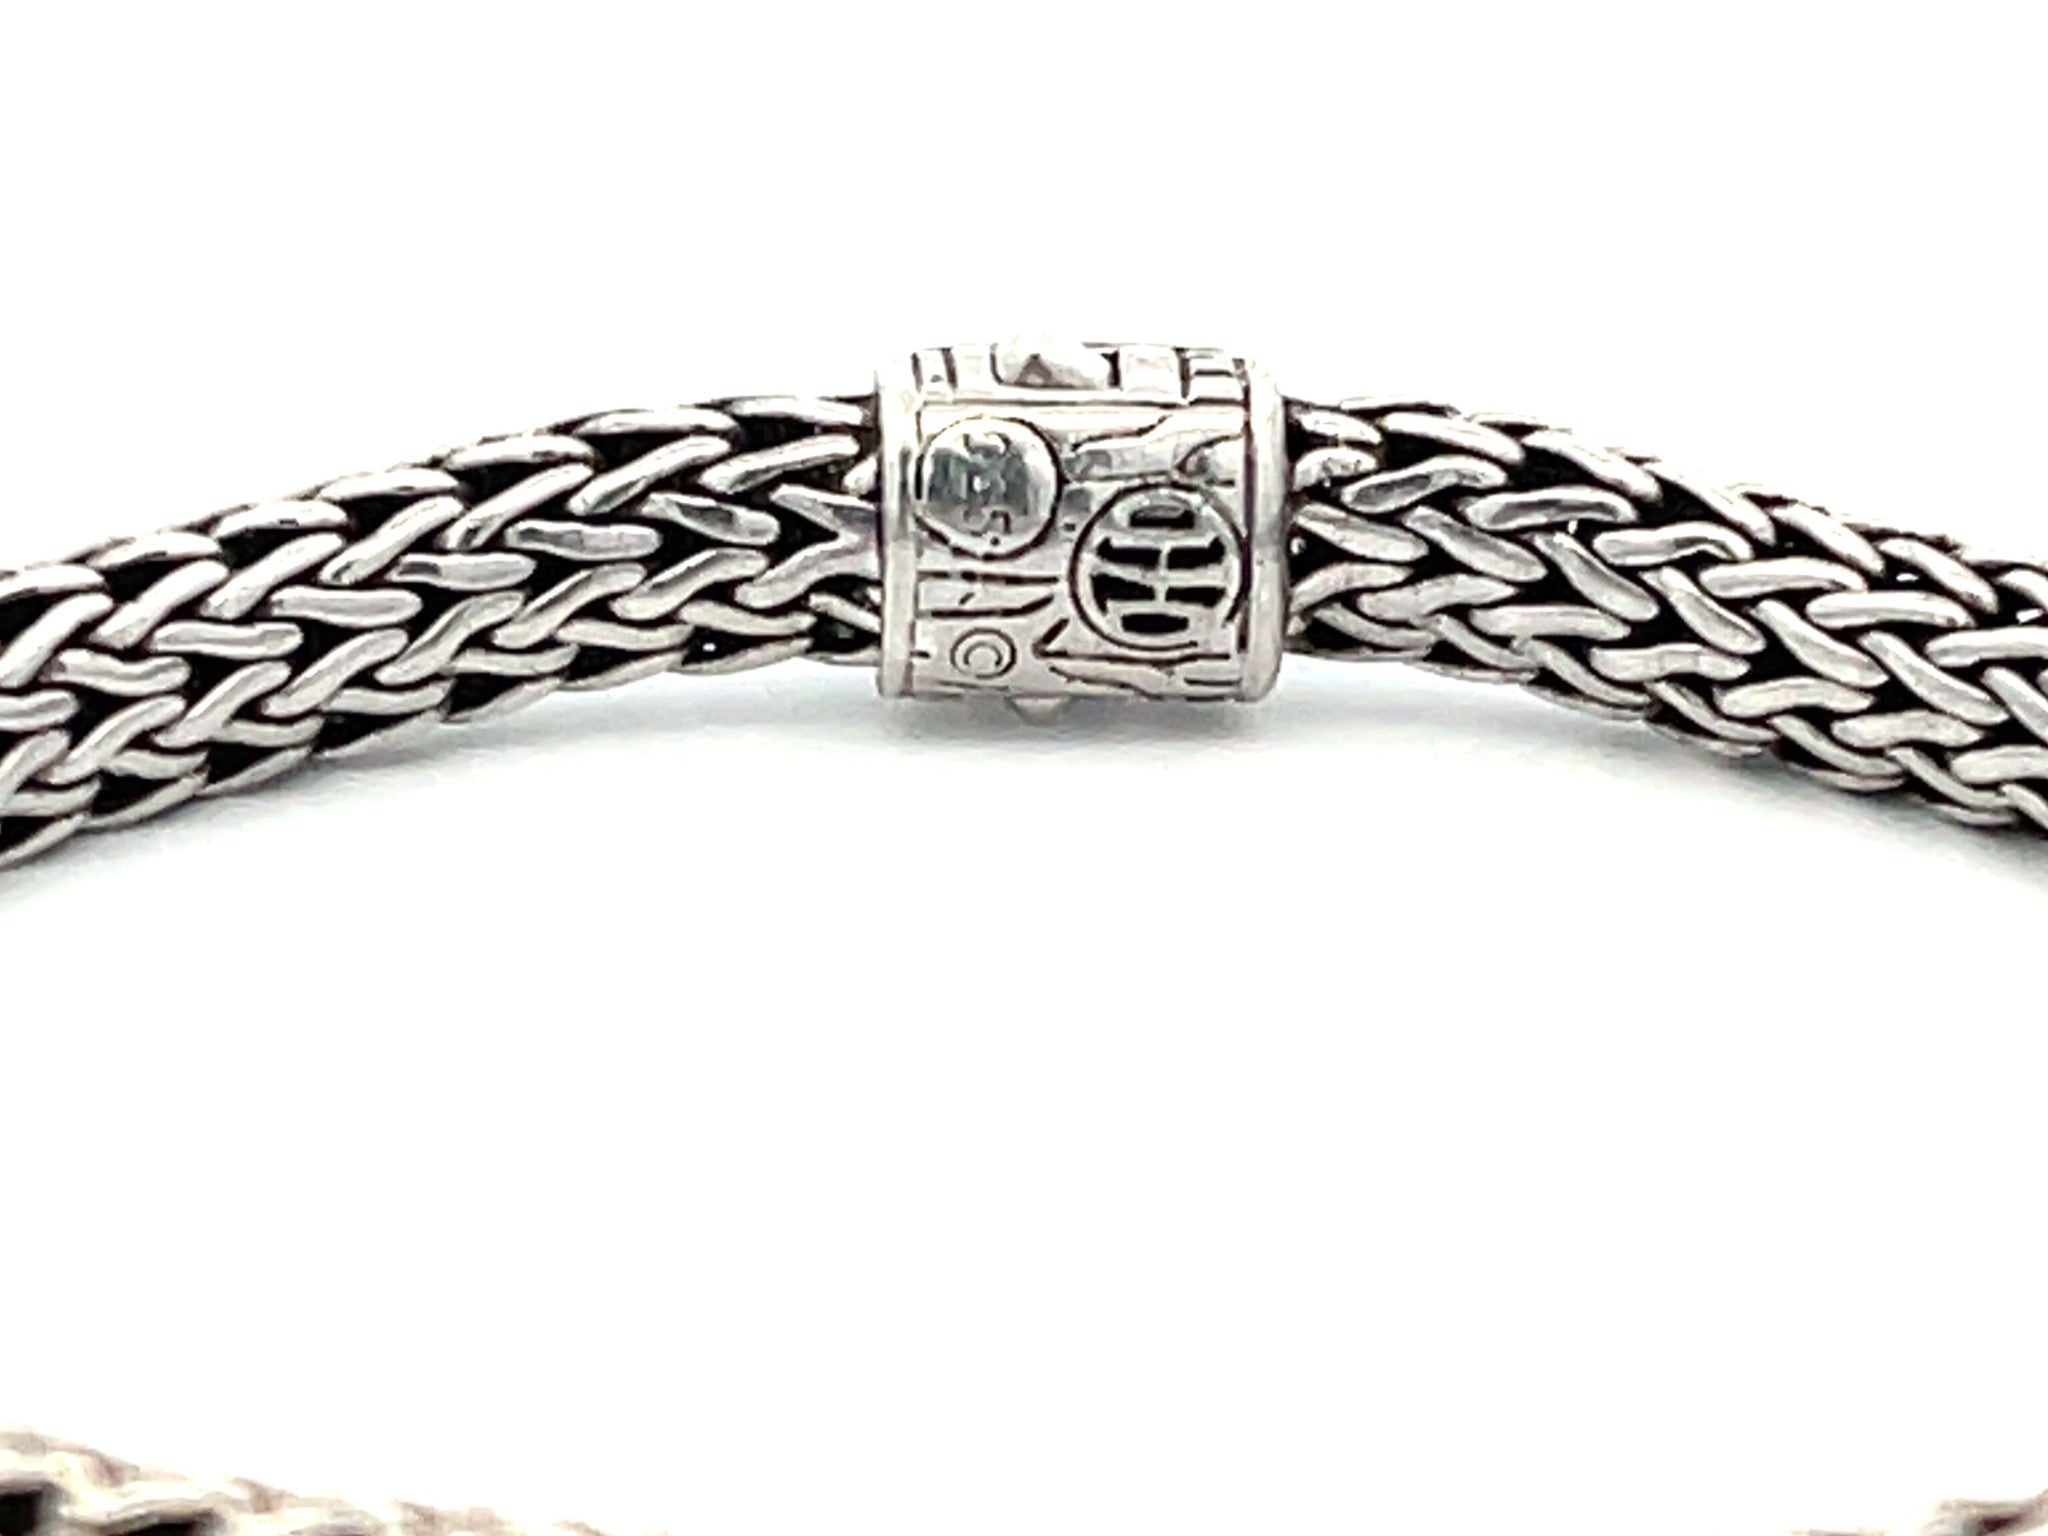 John Hardy Classic Chain Bracelet with Black Sapphire in Sterling Silver